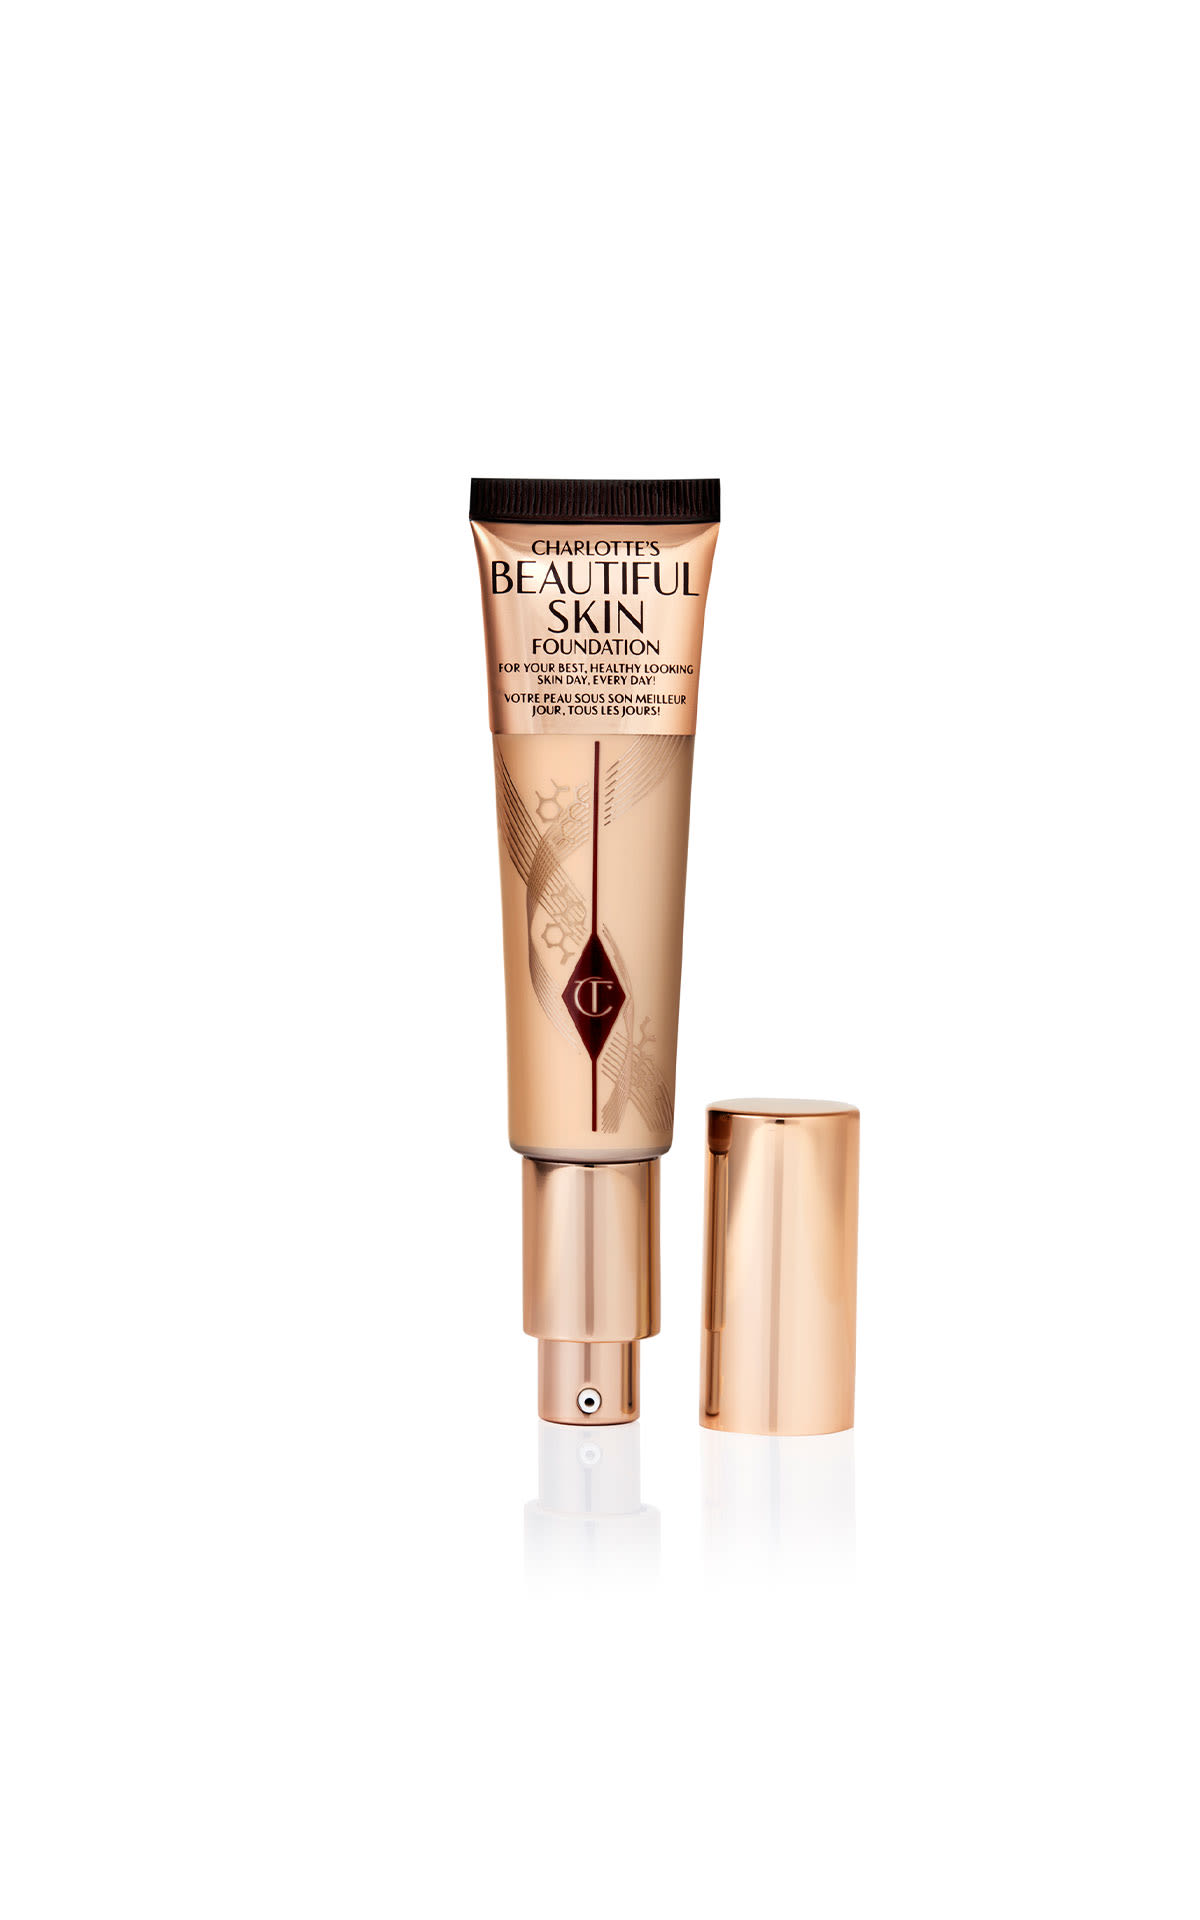 Charlotte Tilbury Charlotte's beautiful skin foundation from Bicester Village